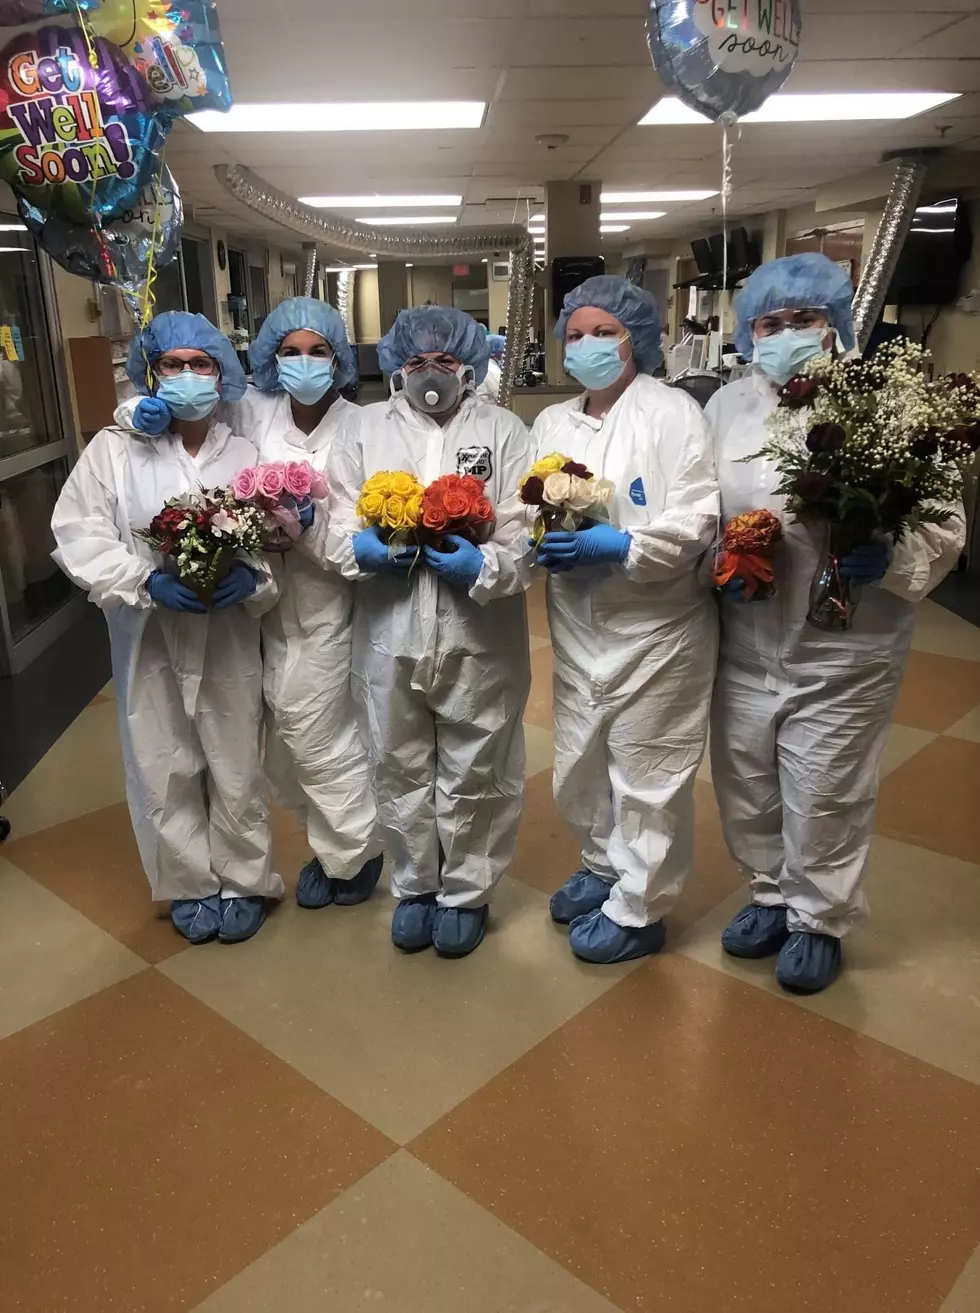 Husband Sends Flowers Daily To Wife In Hospital With COVID-19